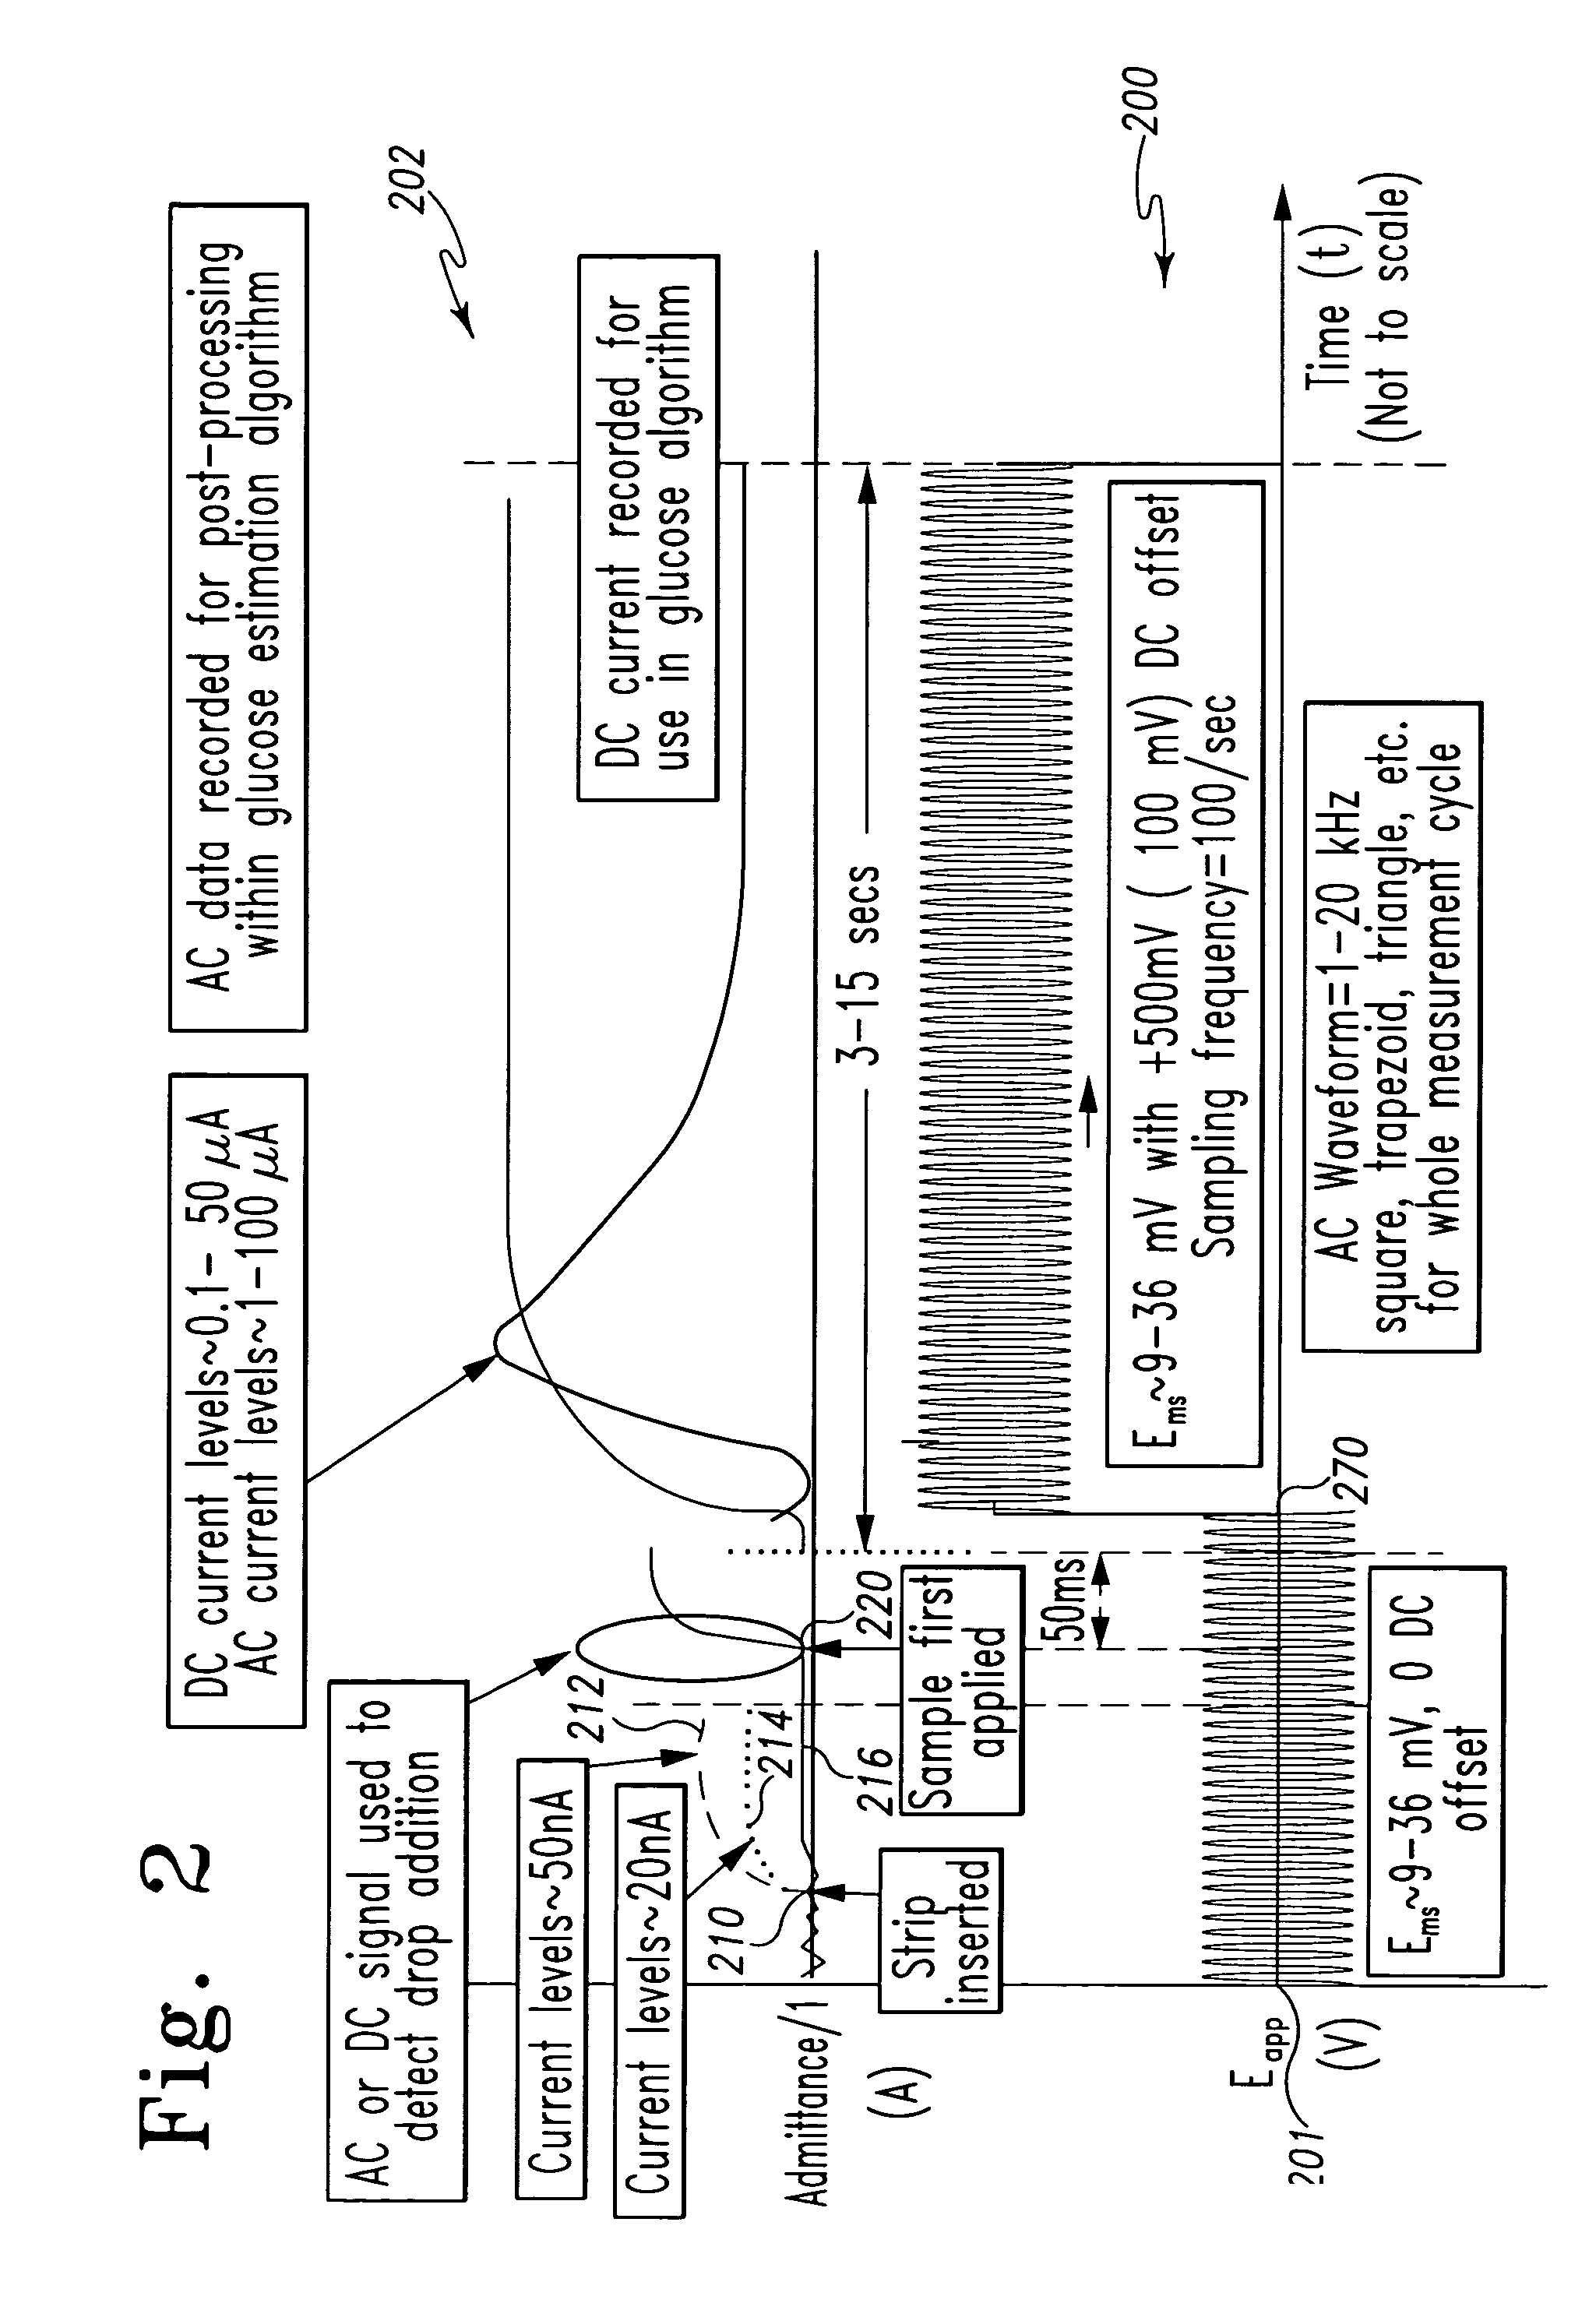 System and method for analyte measurement using AC excitation